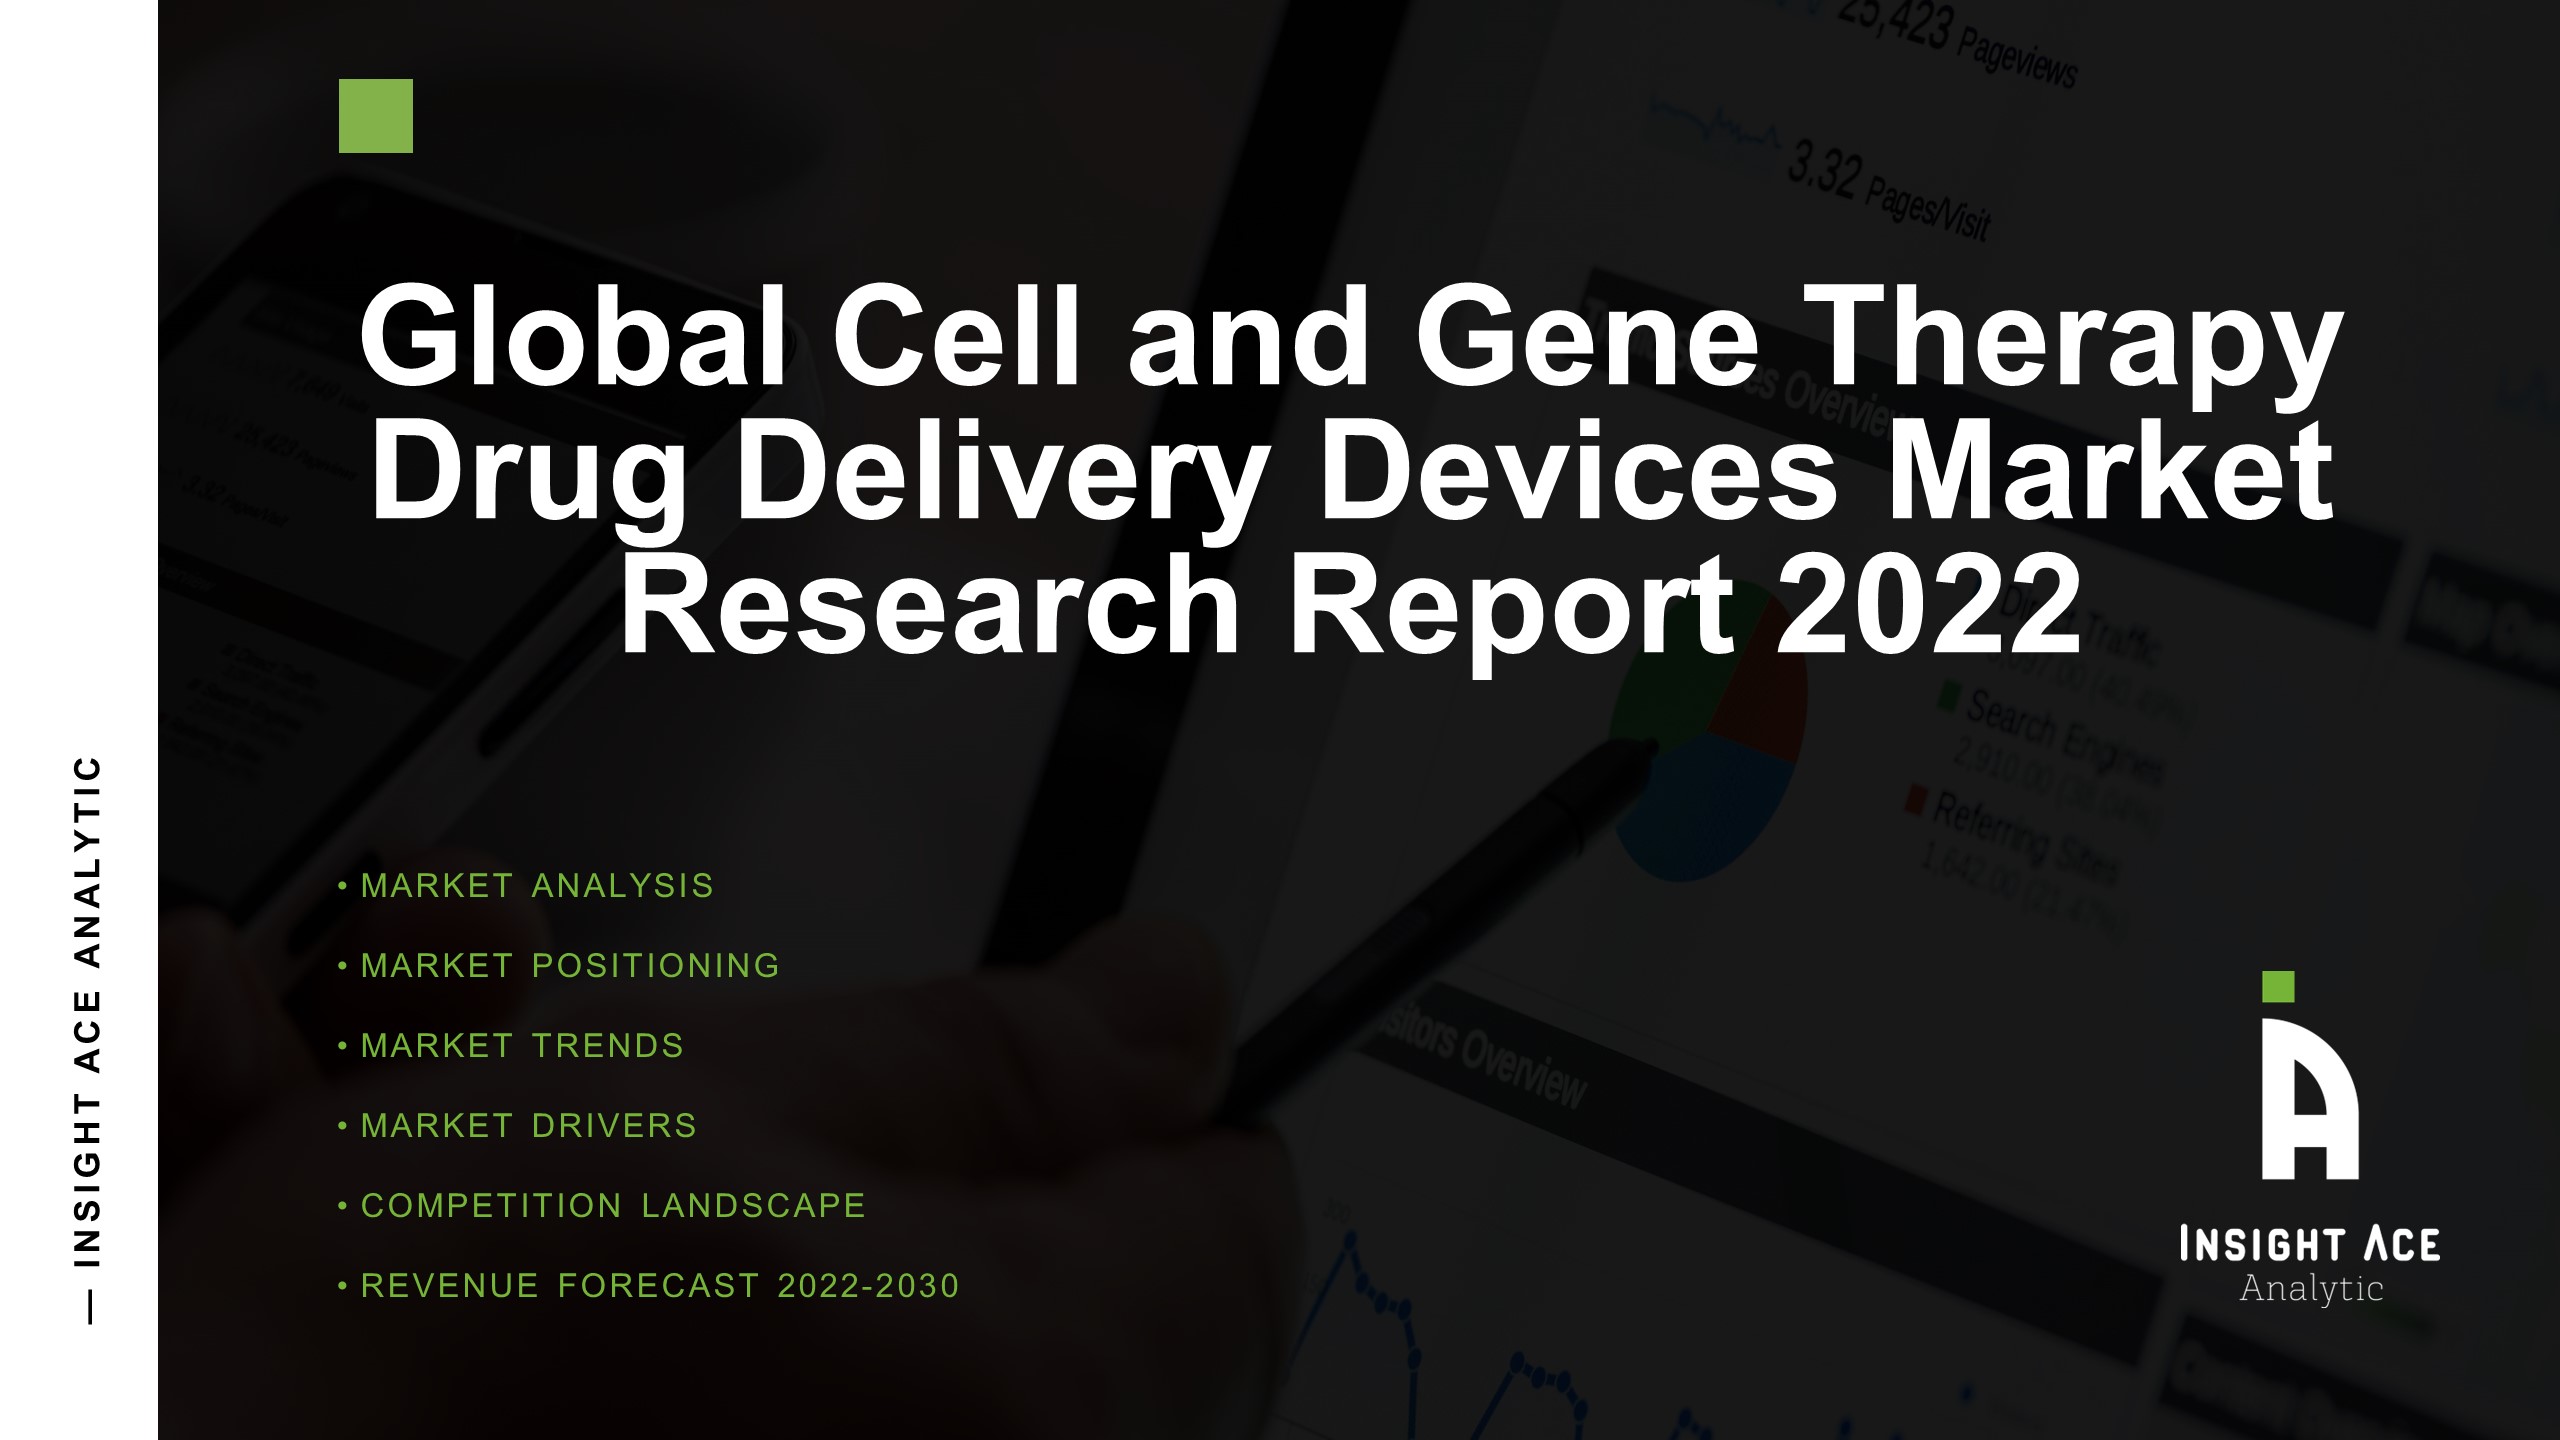 Global Cell and Gene Therapy Drug Delivery Devices Market 